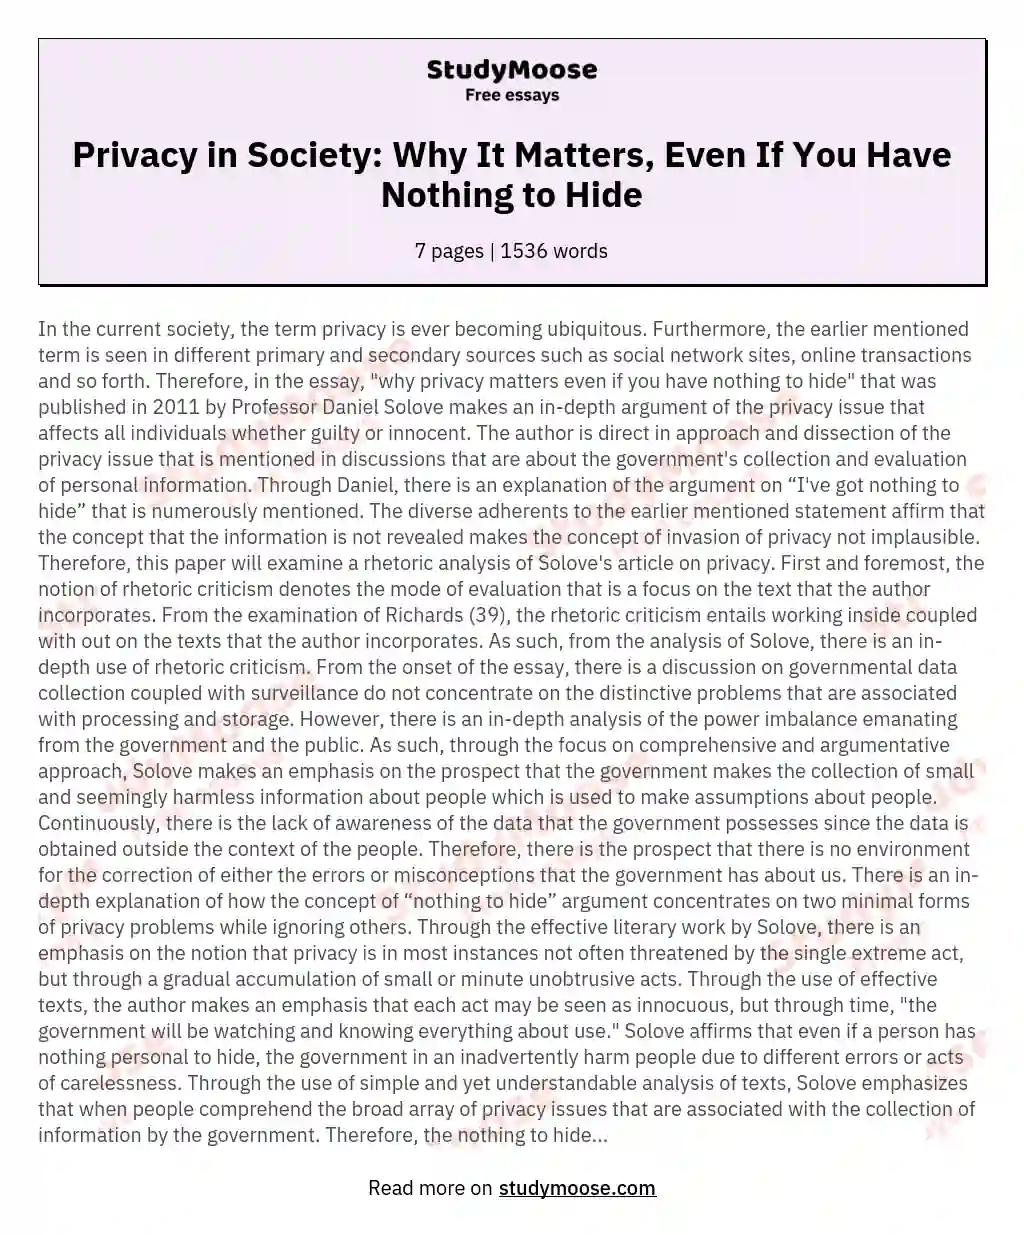 Privacy in Society: Why It Matters, Even If You Have Nothing to Hide